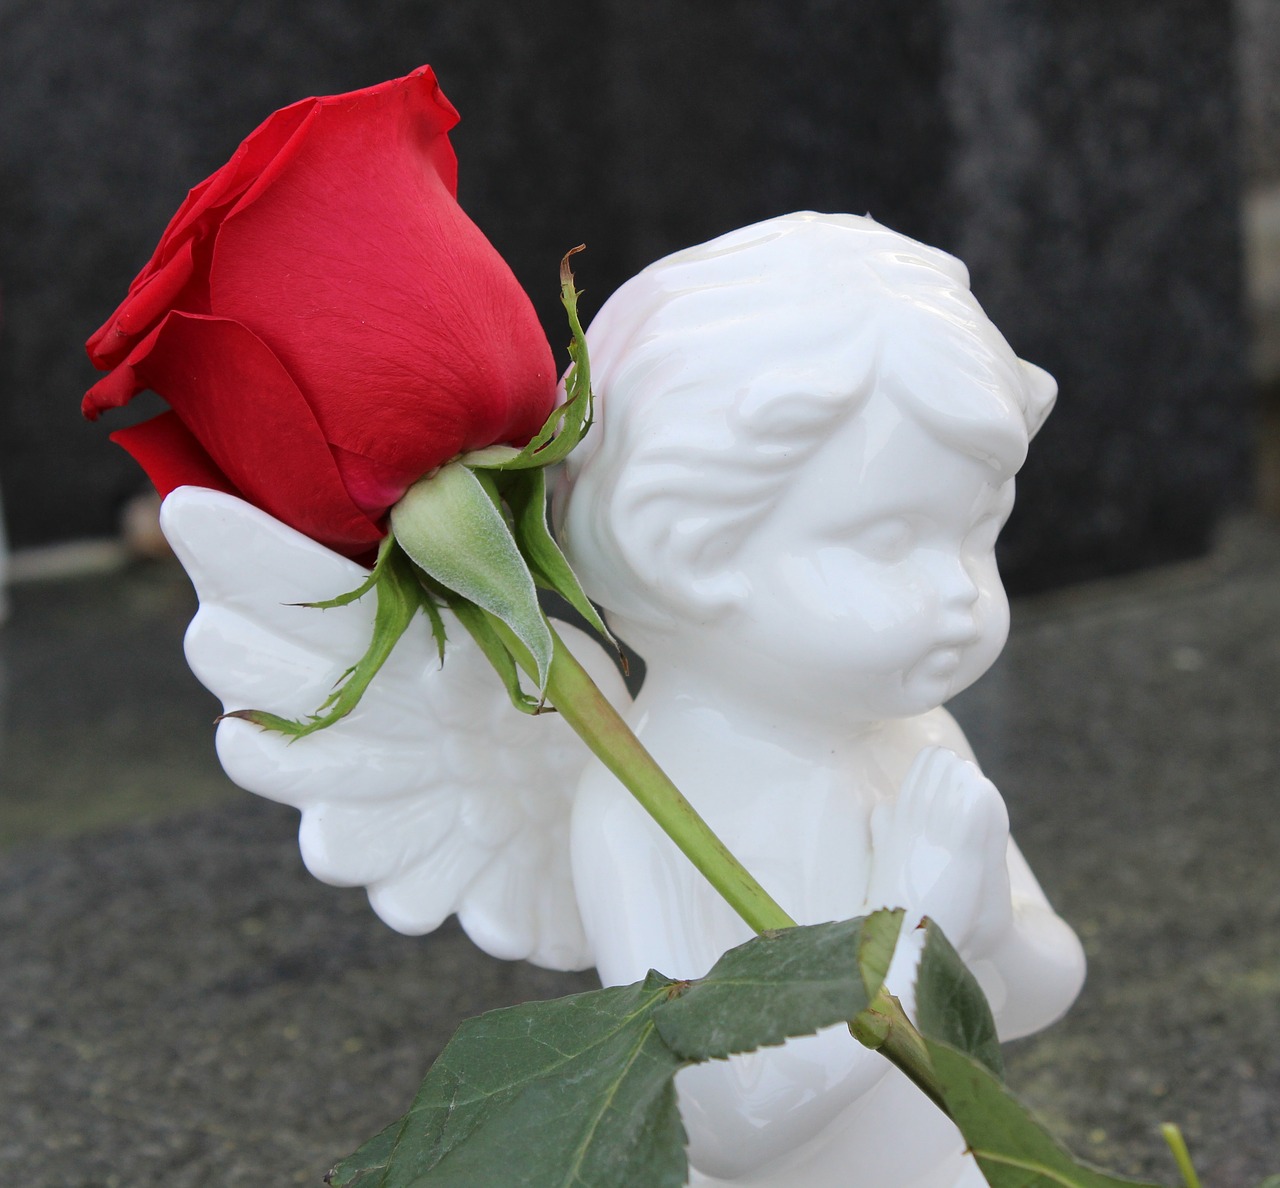 stop child suicide angel red rose free photo